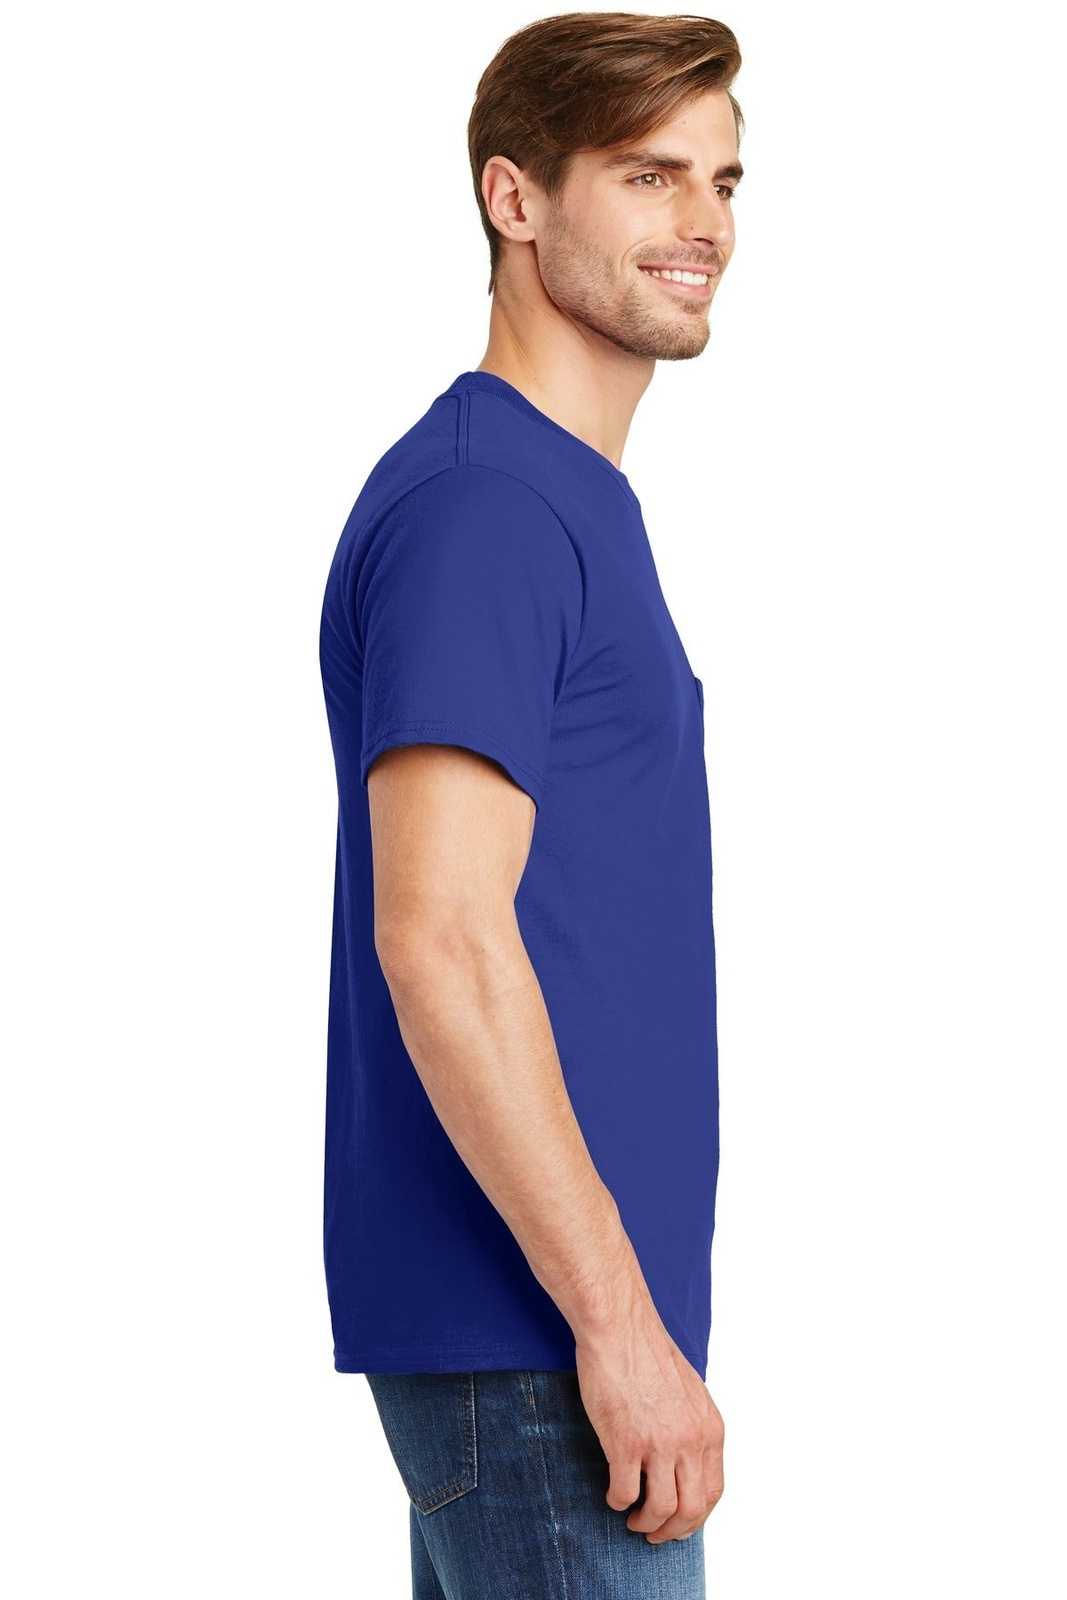 Hanes 5190 Beefy-T 100% Cotton T-Shirt with Pocket - Deep Royal - HIT a Double